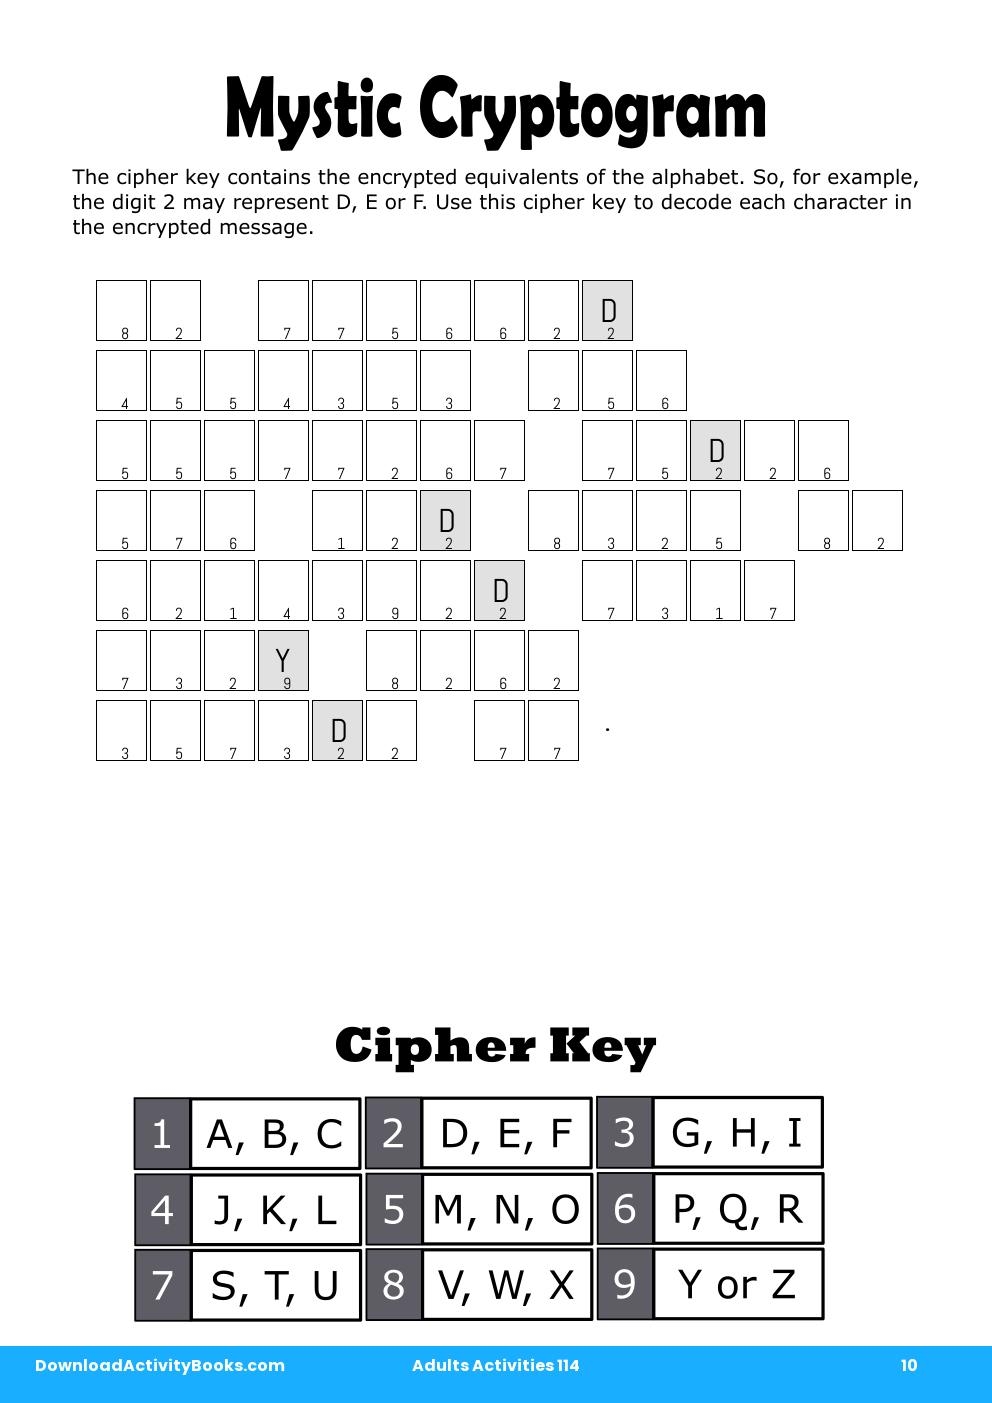 Mystic Cryptogram in Adults Activities 114